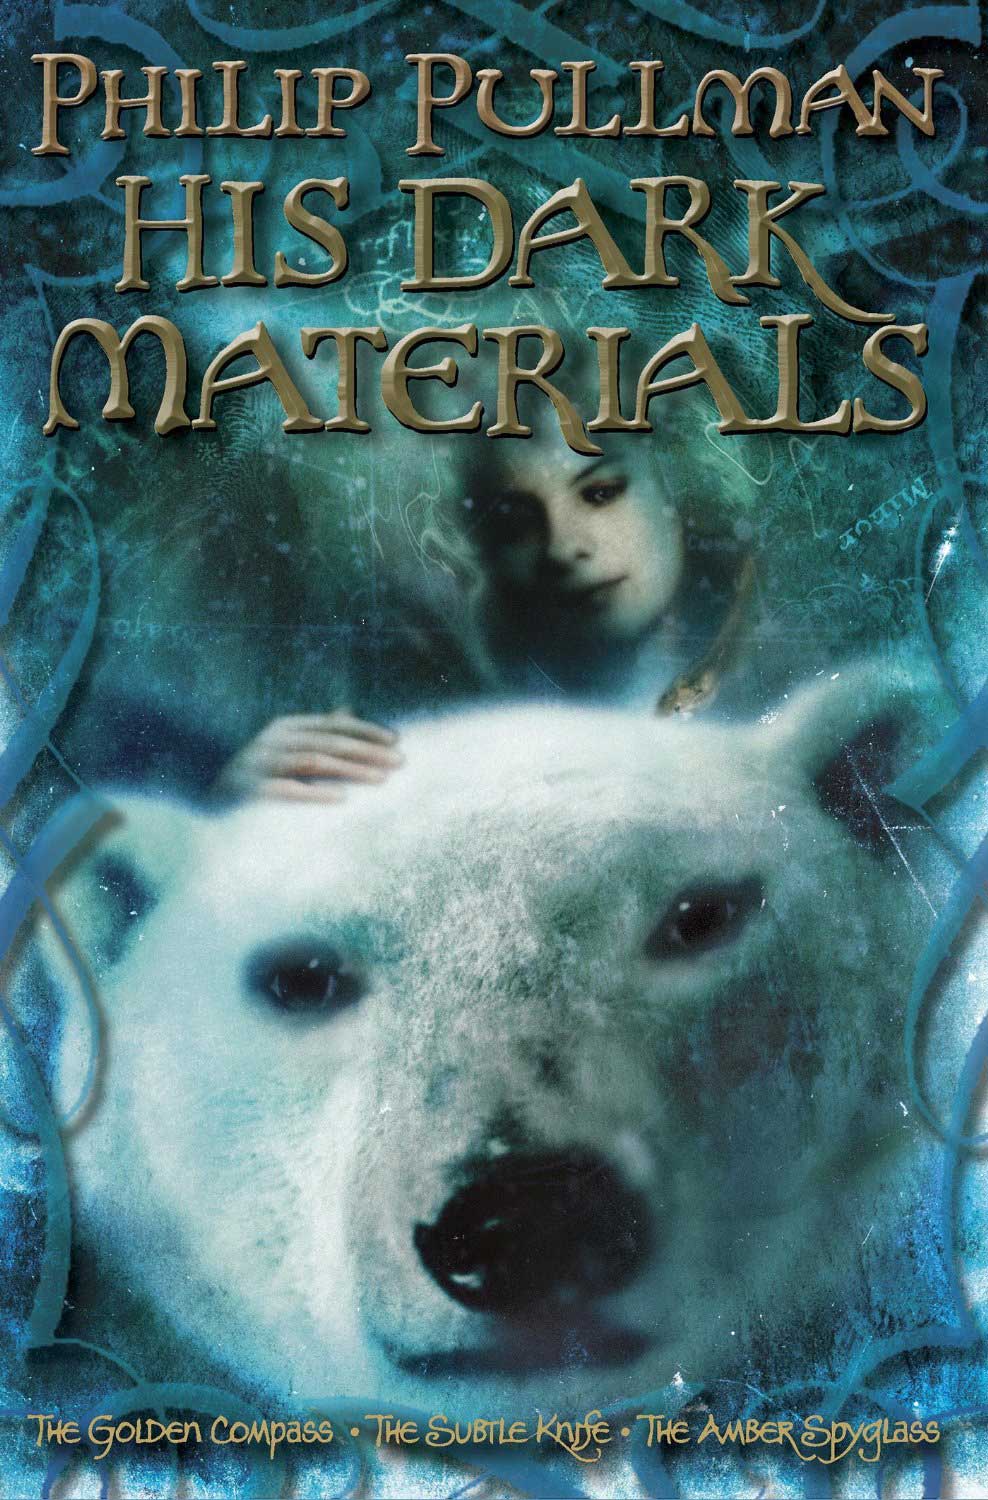 <strong><a href="http://www.amazon.com/dp/0375847227/?tag=timecom-20" target="_blank">His Dark Materials (series)</a></strong>By Philip Pullman. Pullman takes the reader through various parallel universes in this science fantasy series centered around young Lyra Belacqua and Will Parry. (Scholastic)